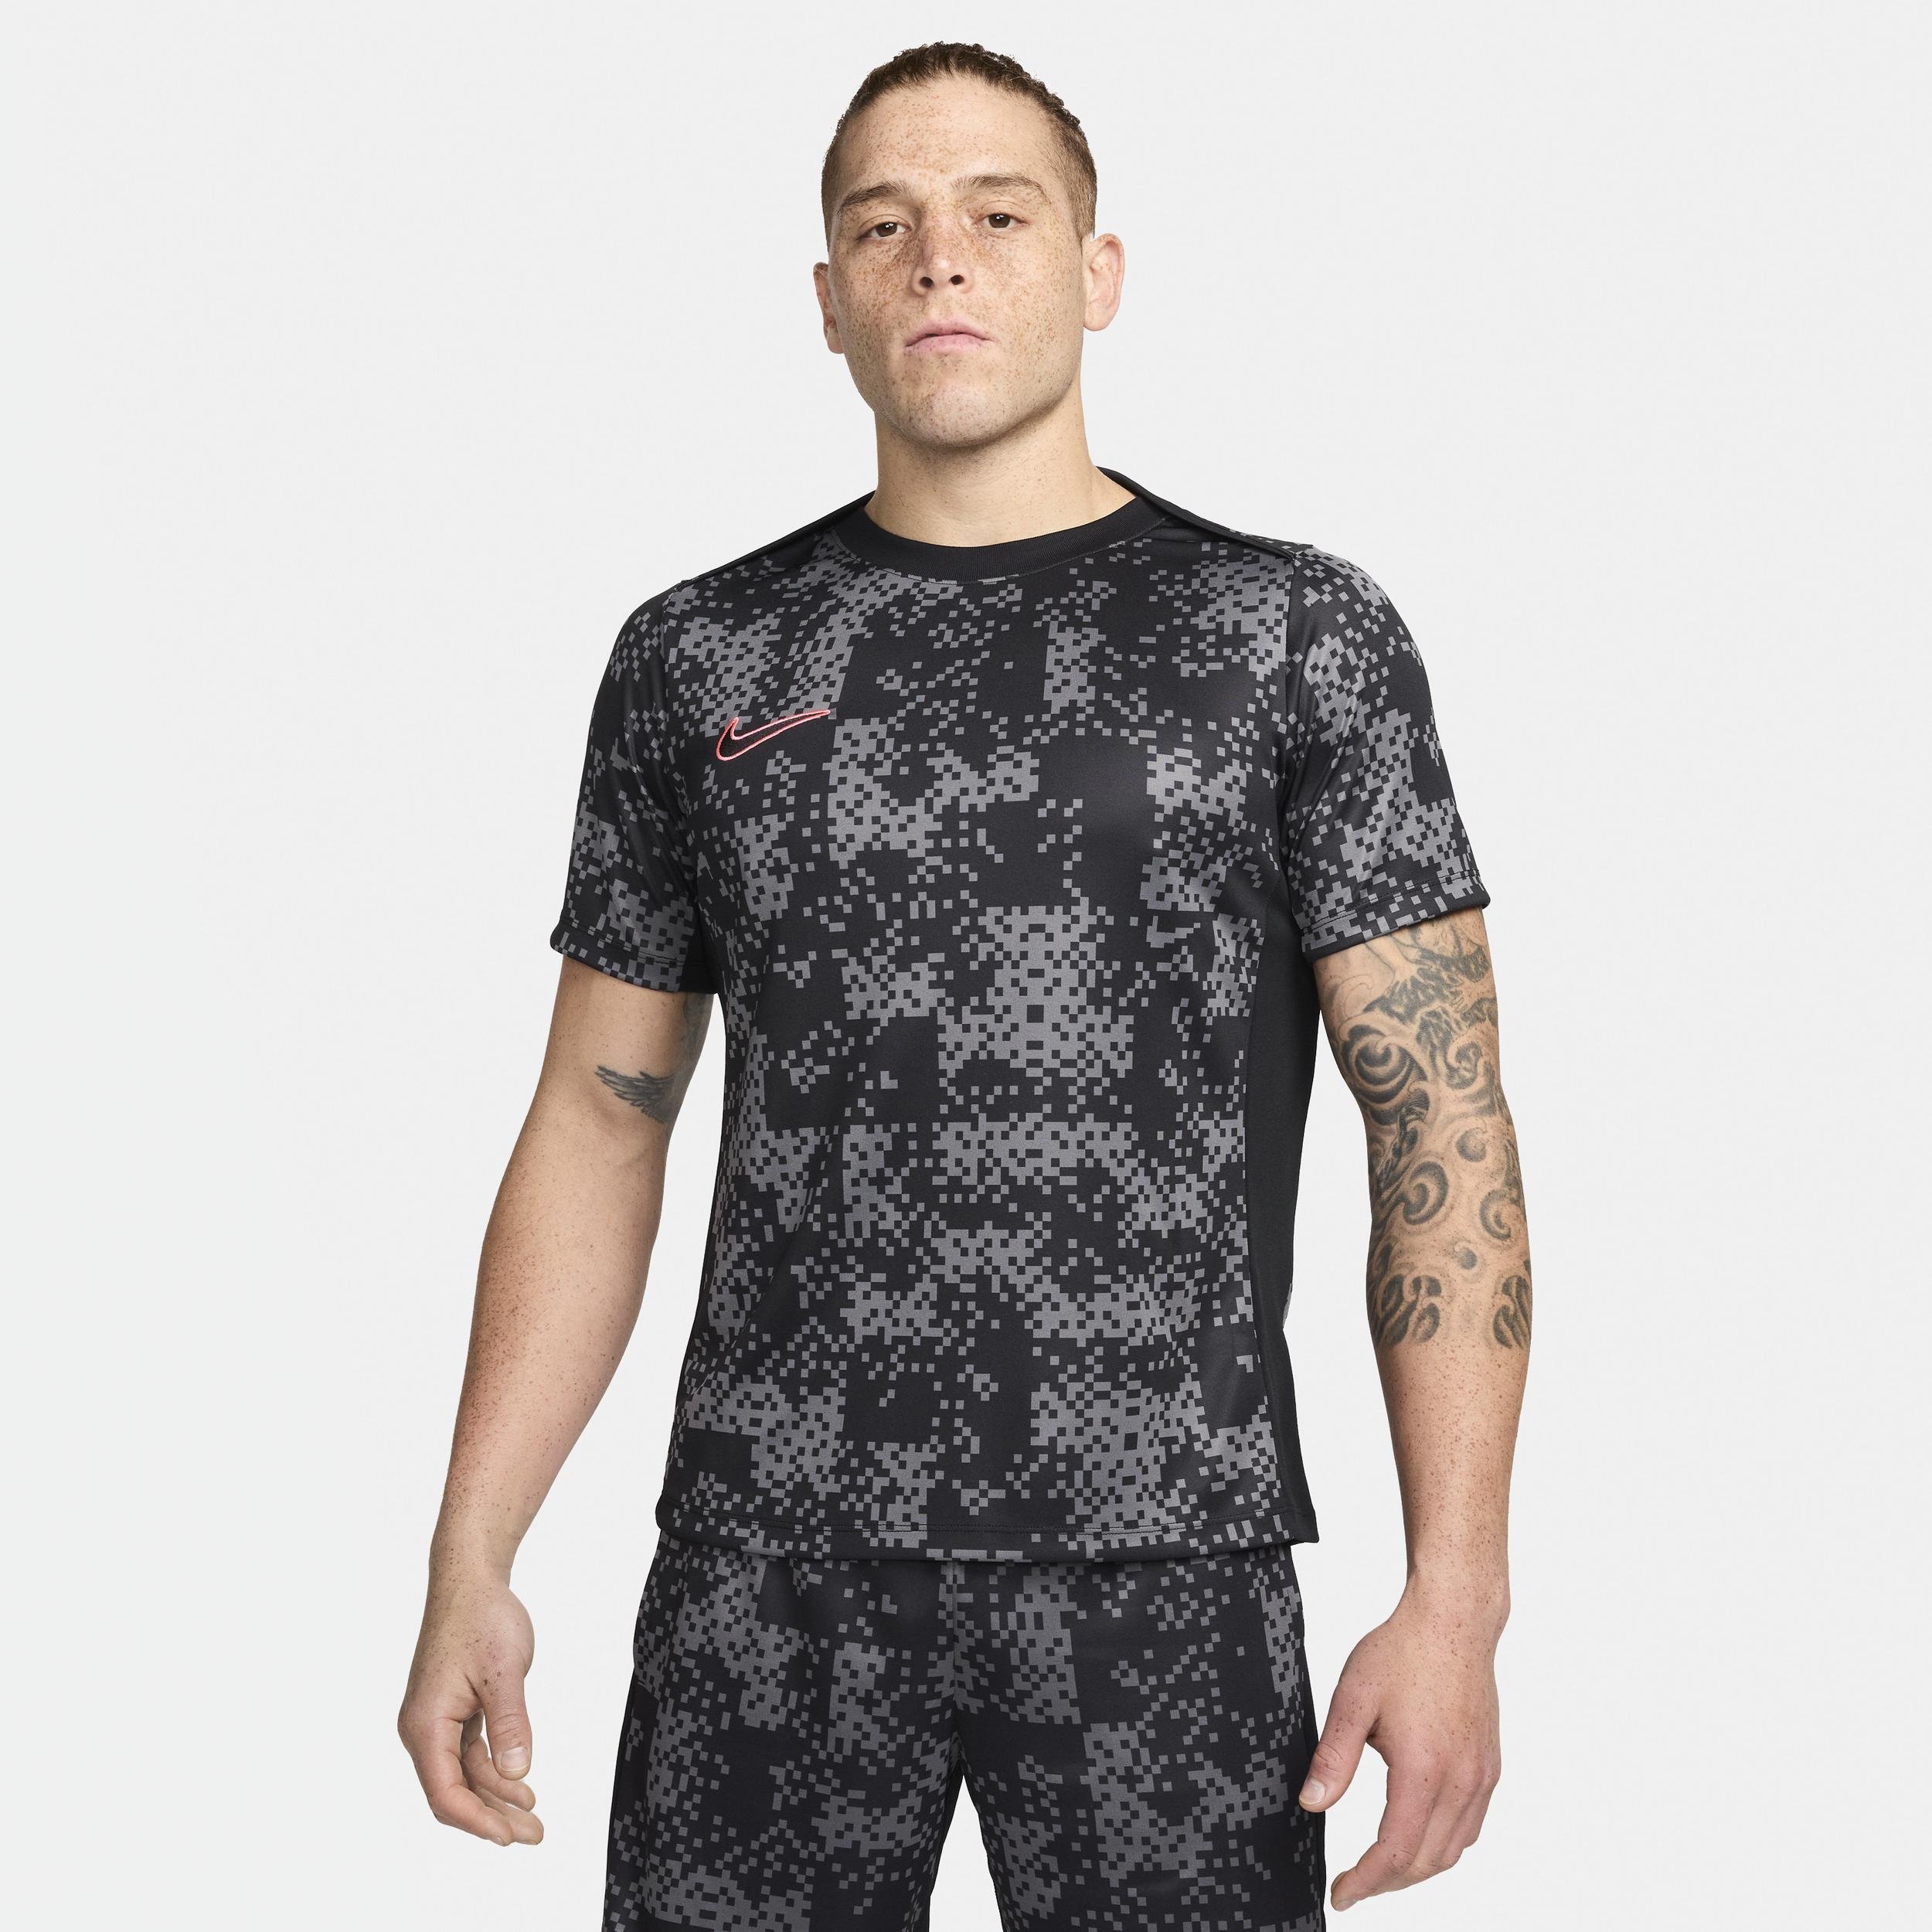 Nike Men's Academy Pro Dri-FIT Soccer Short-Sleeve Graphic Top by NIKE